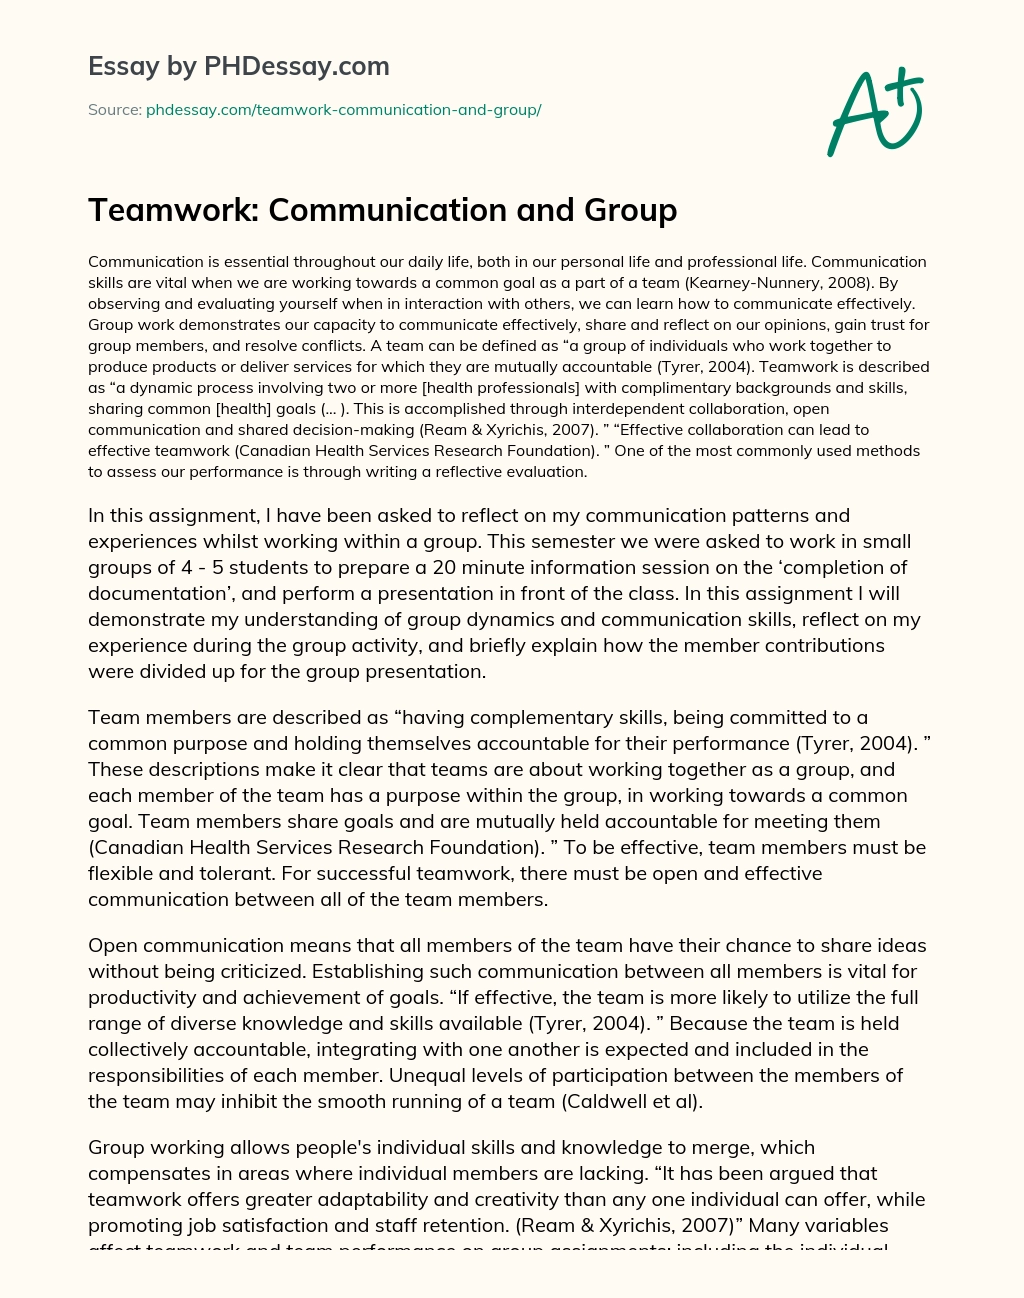 Teamwork: Communication and Group essay